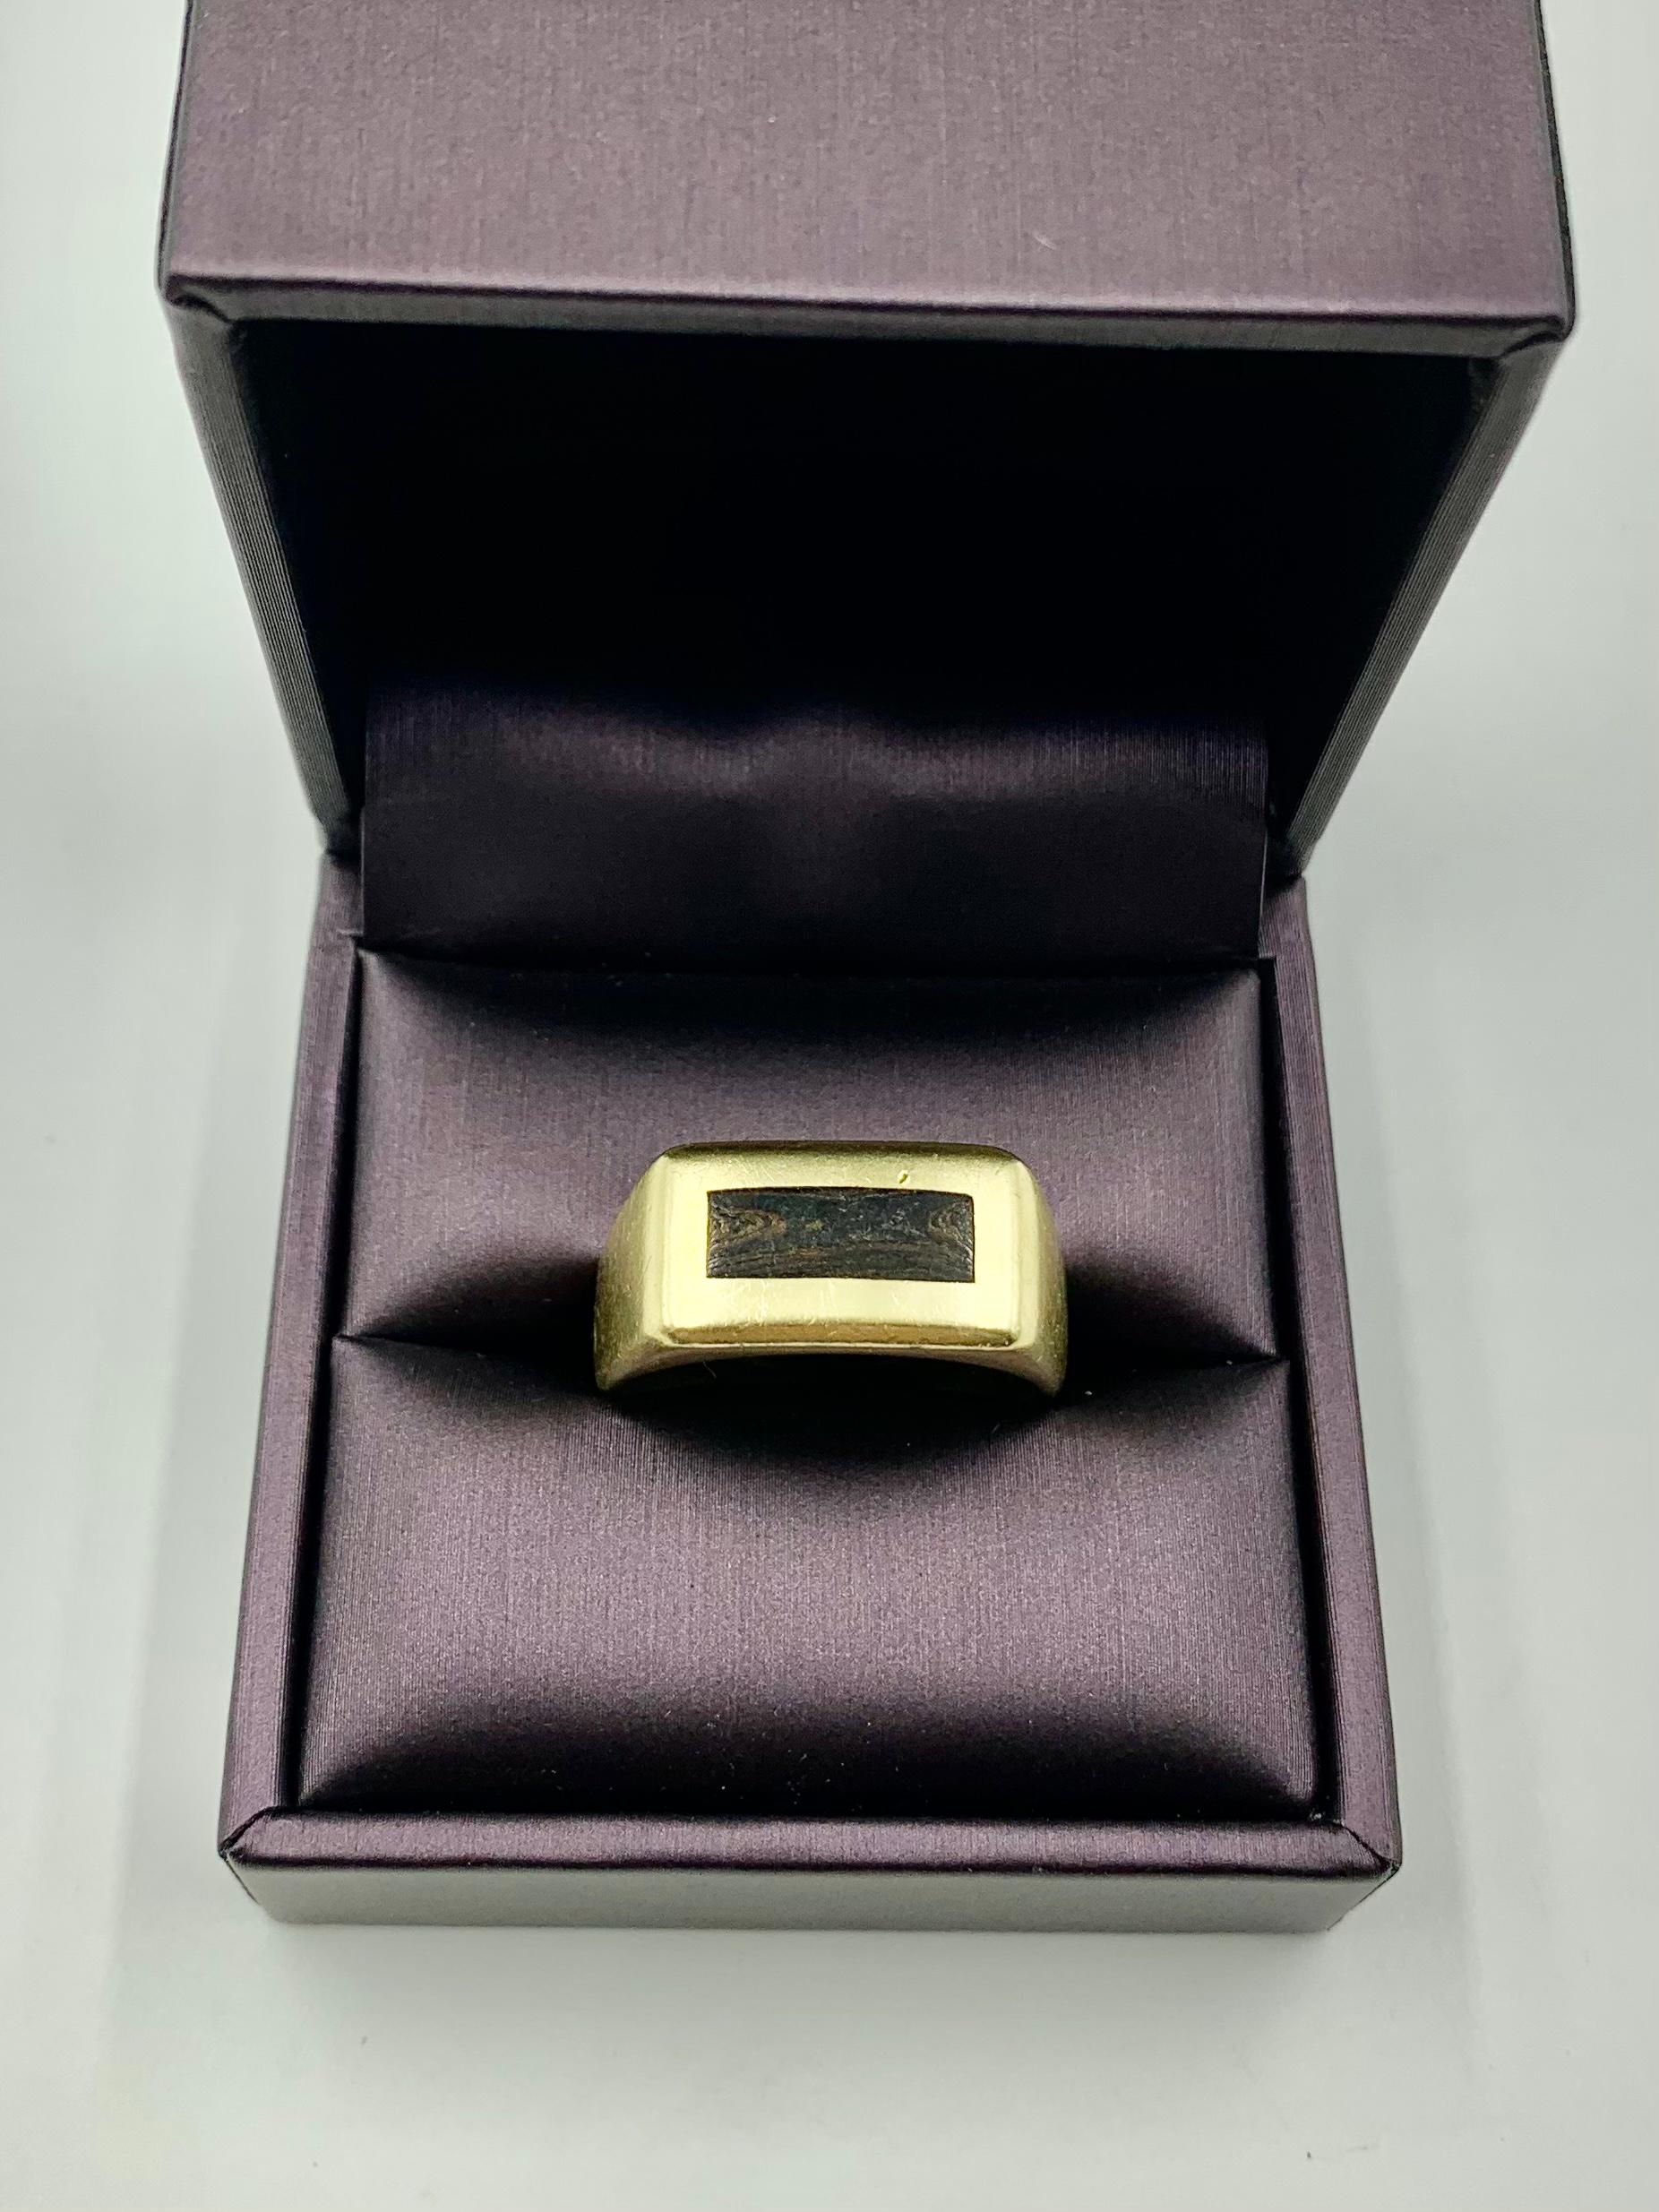 High quality, estate 18K gold and wood signet ring.
Classic design, possibly by one of the great European jewelry houses, nice patina with partial marks on the exterior. Attractively well worn.
Cartier, Van Cleef & Arpels, Boucheron, Gucci were